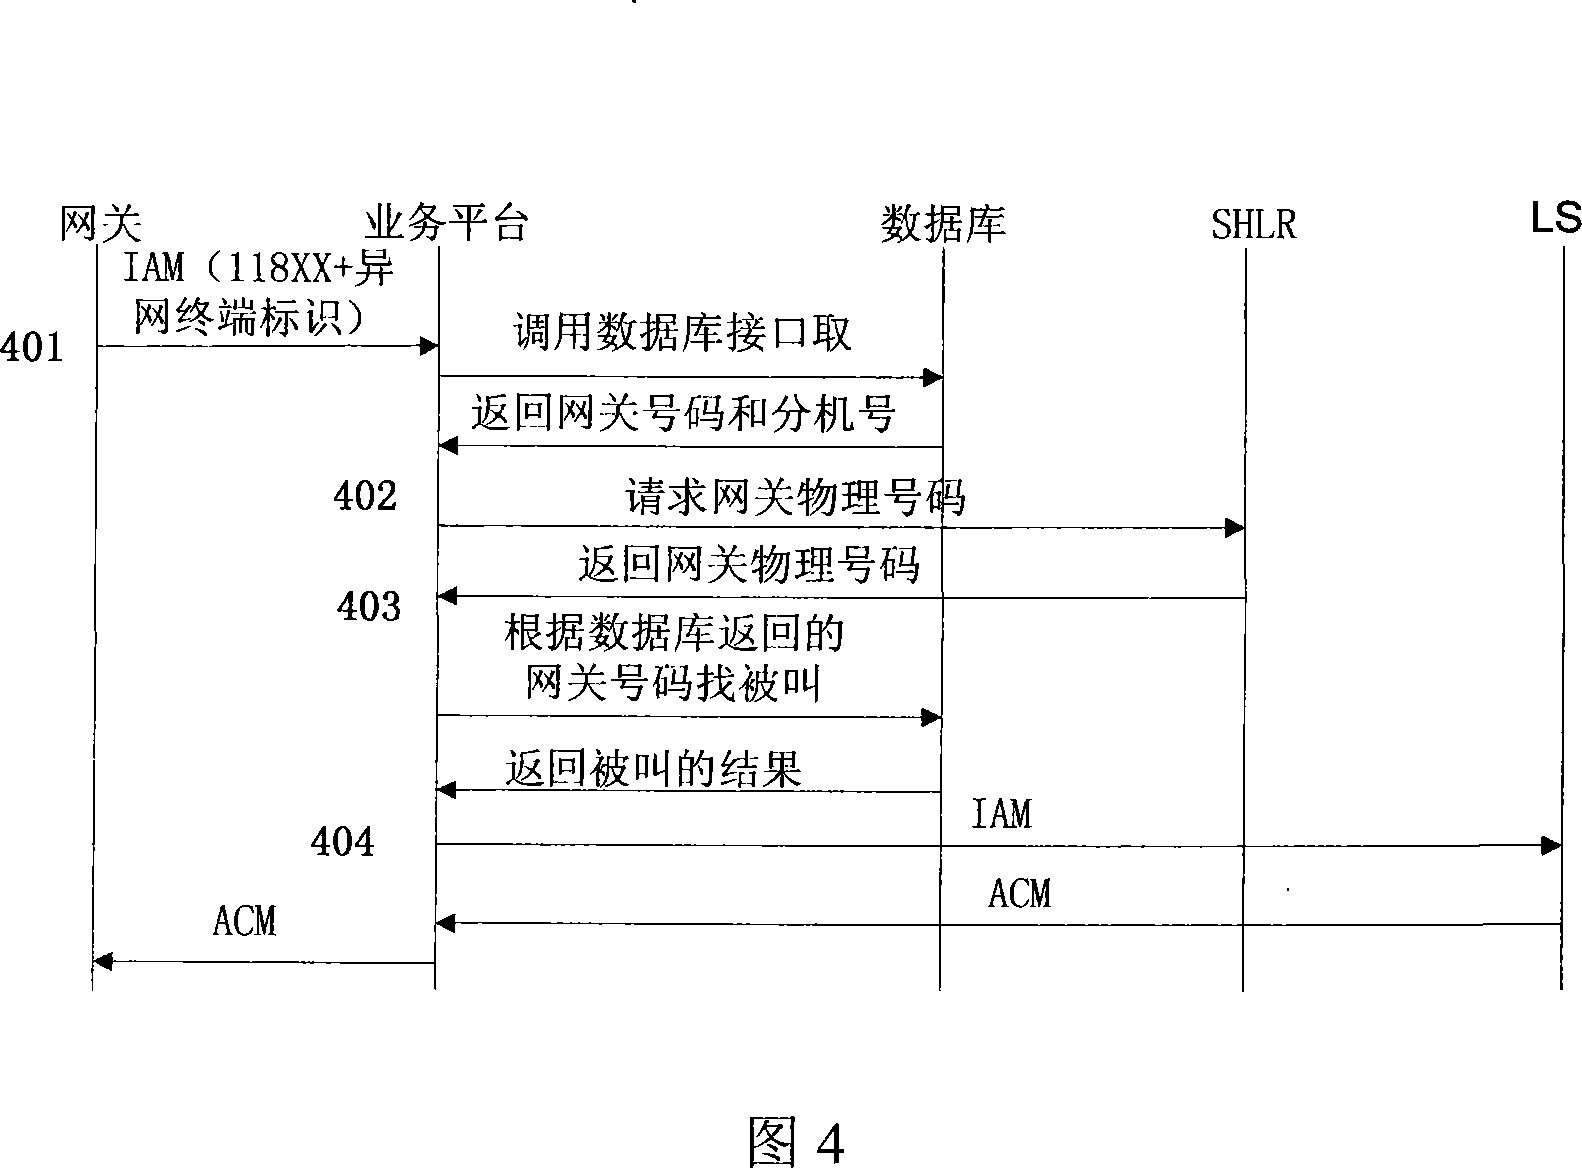 Method for mobile terminal to access fixed network